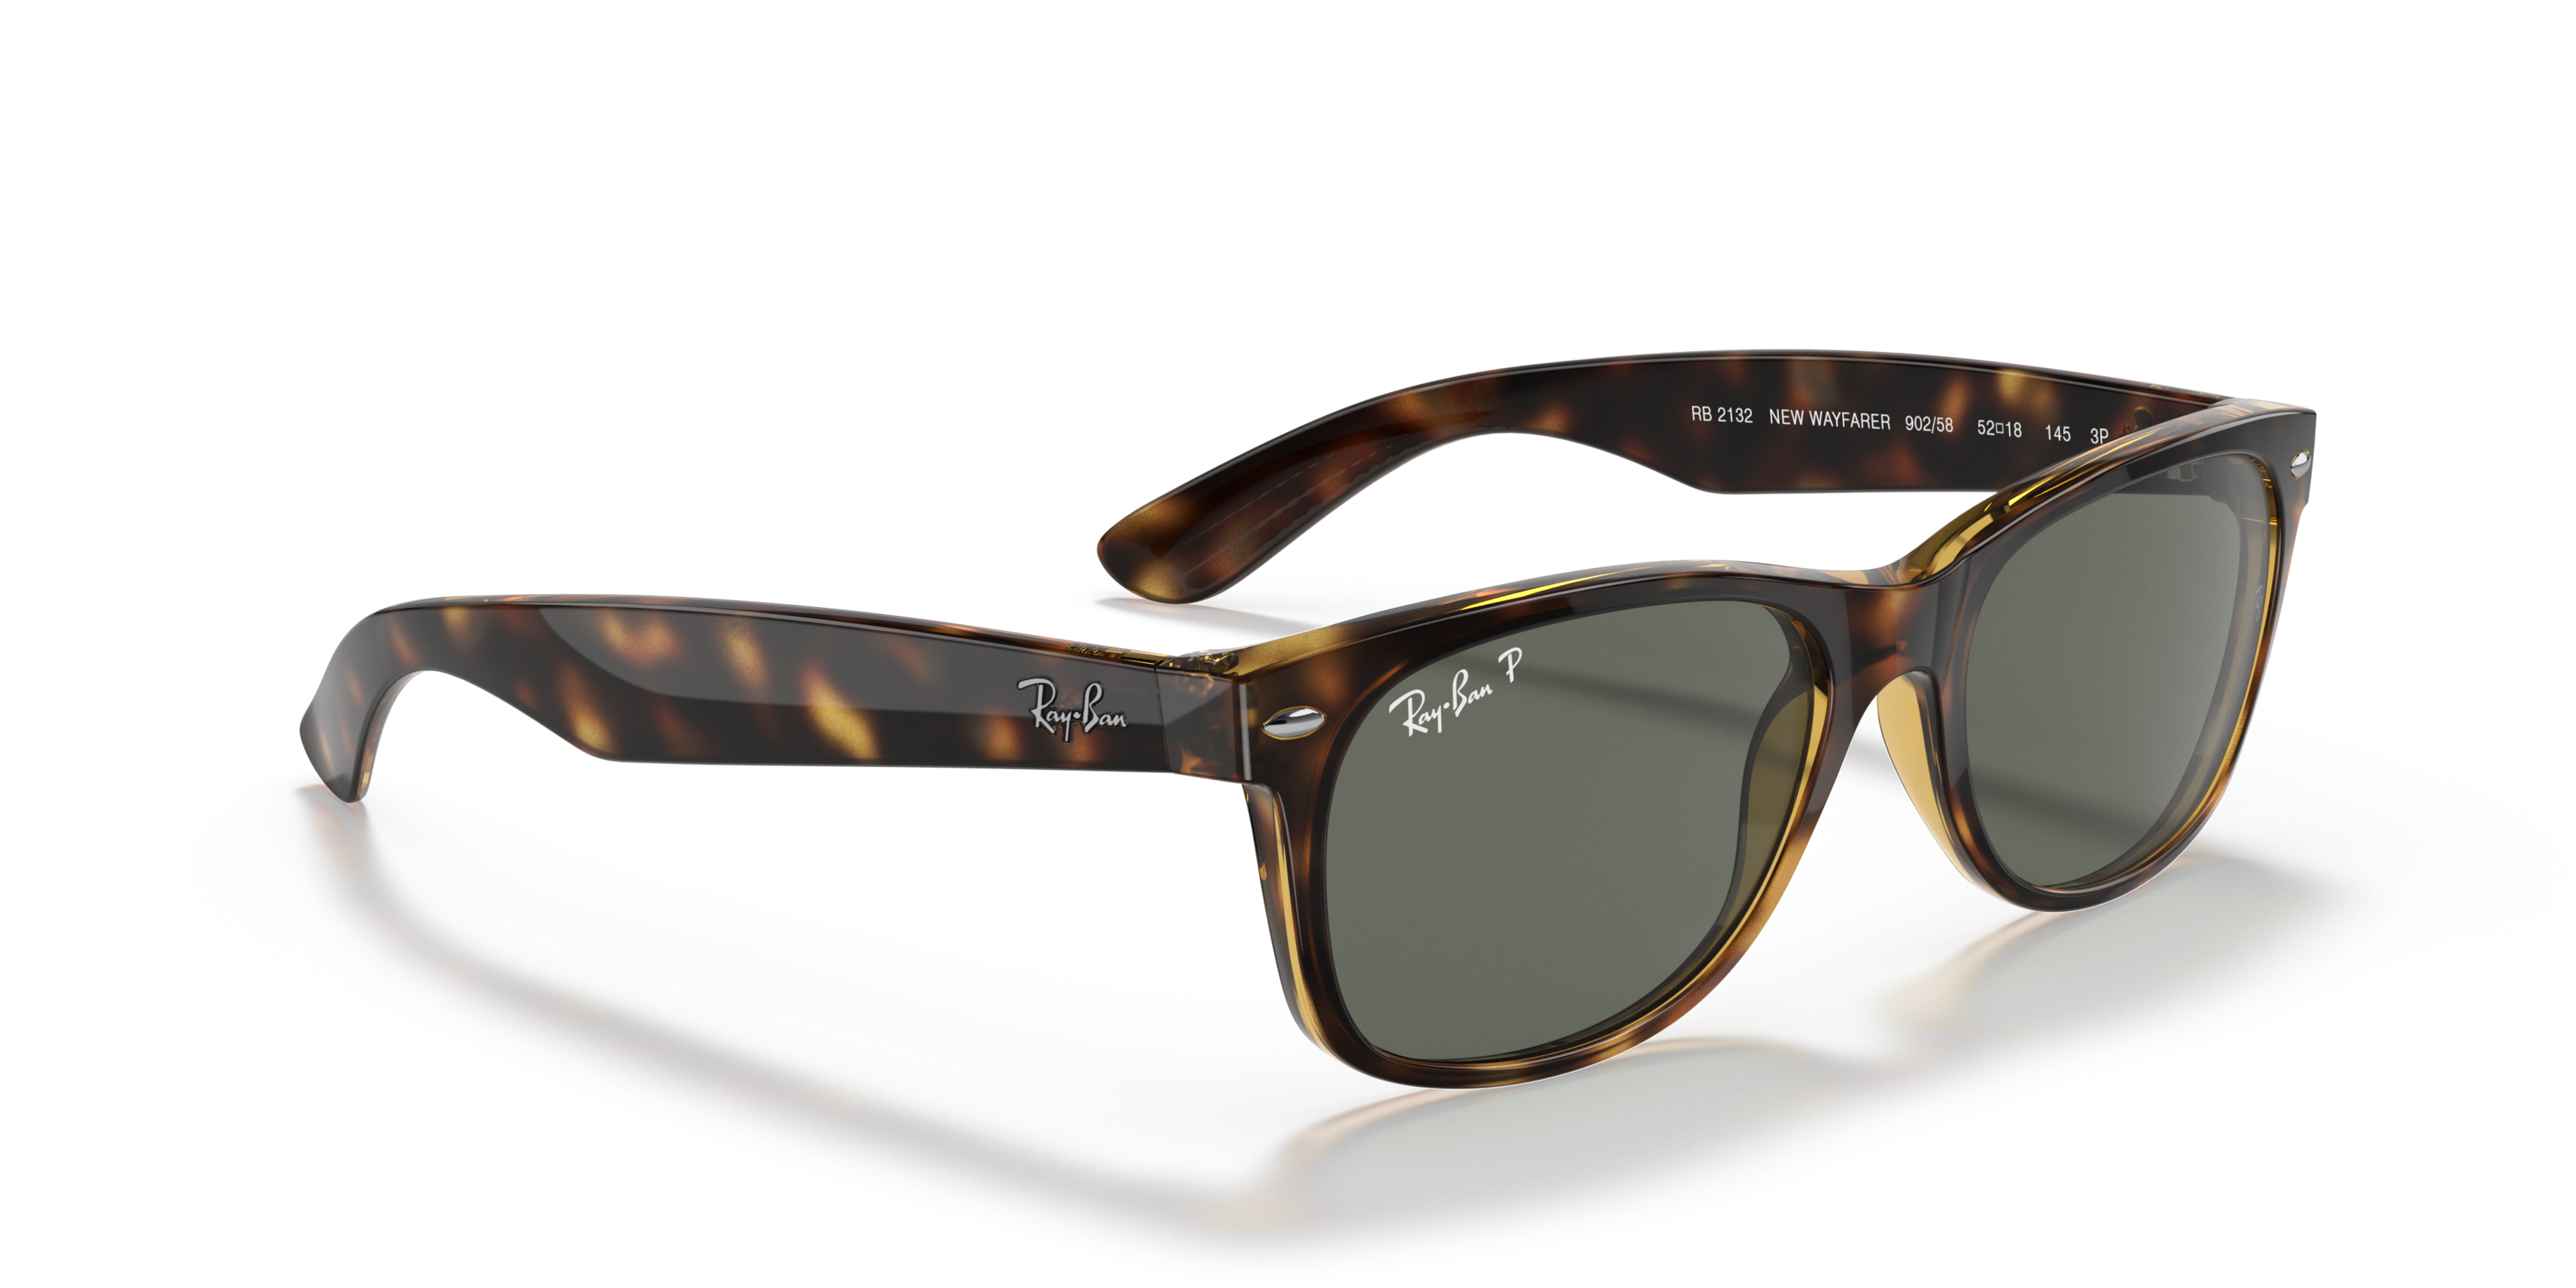 [products.image.angle_right01] Ray-Ban NEW WAYFARER RB2132 902/58